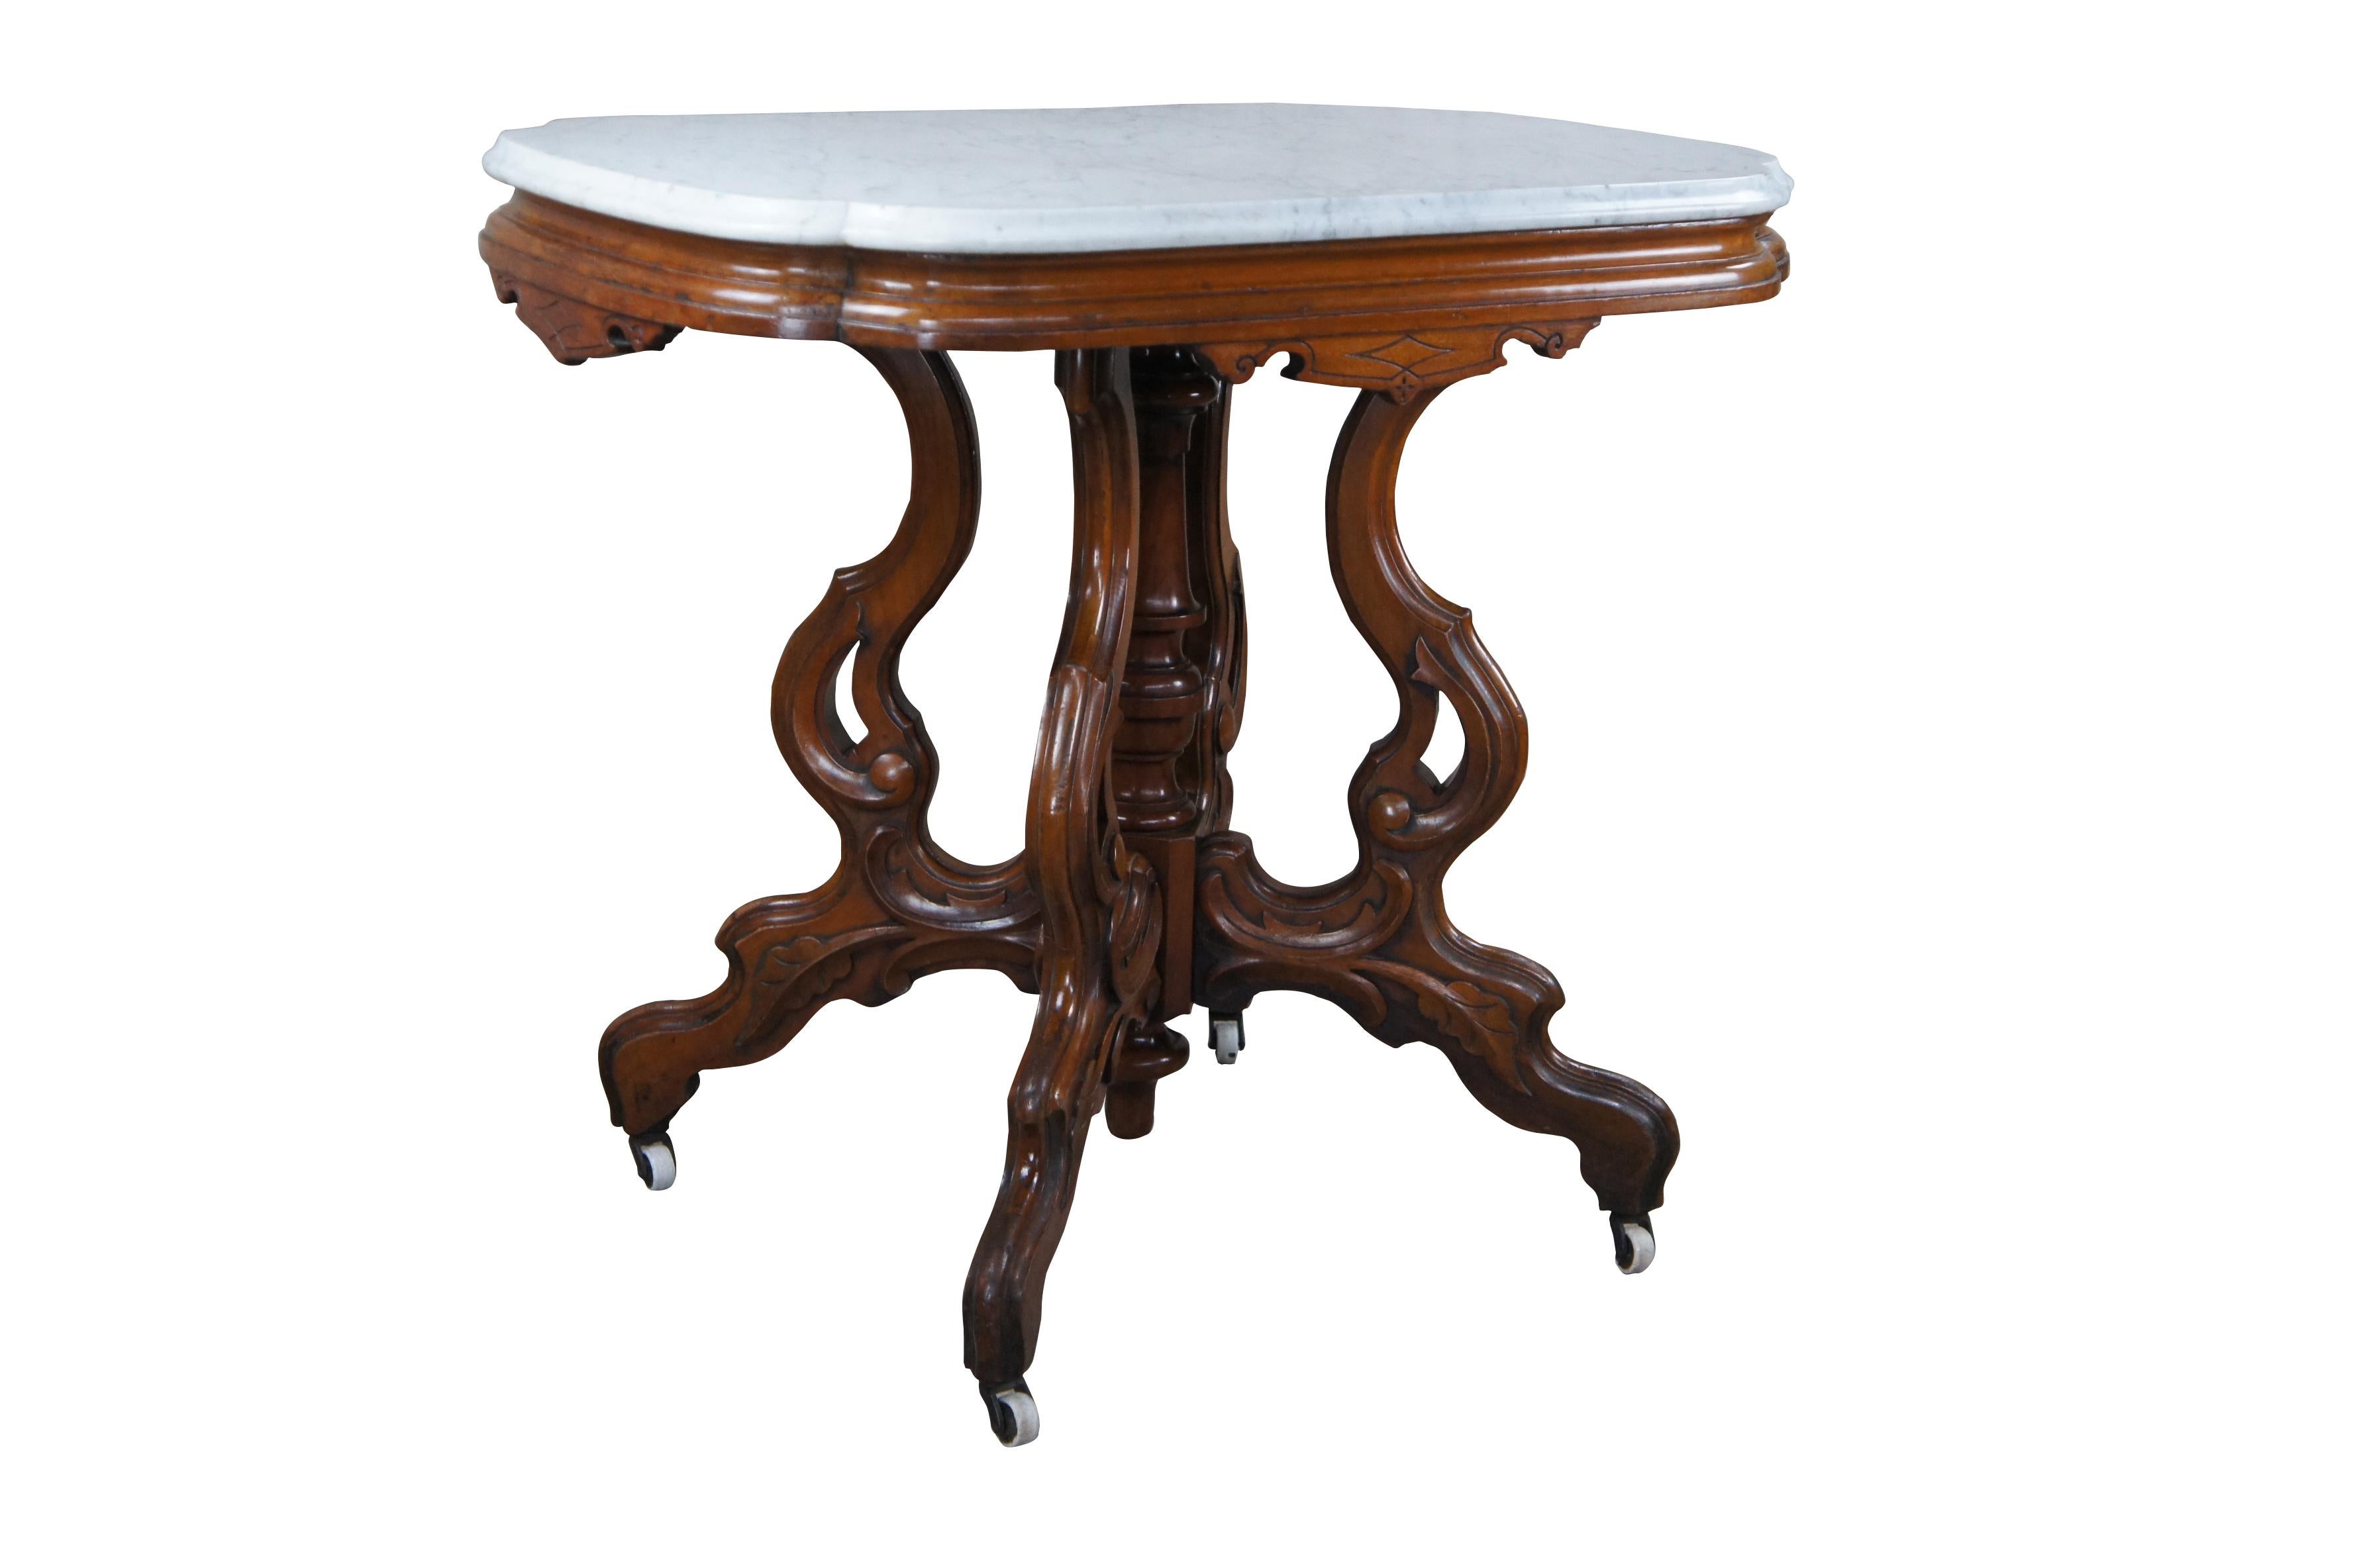 Antique Victorian Eastlake parlor table, circa 1880s.  Made from walnut featuring a rectangular / scalloped and beveled marble top with turned center support surrounded by four serpentine carved acanthus legs over castors.

Dimensions:
33